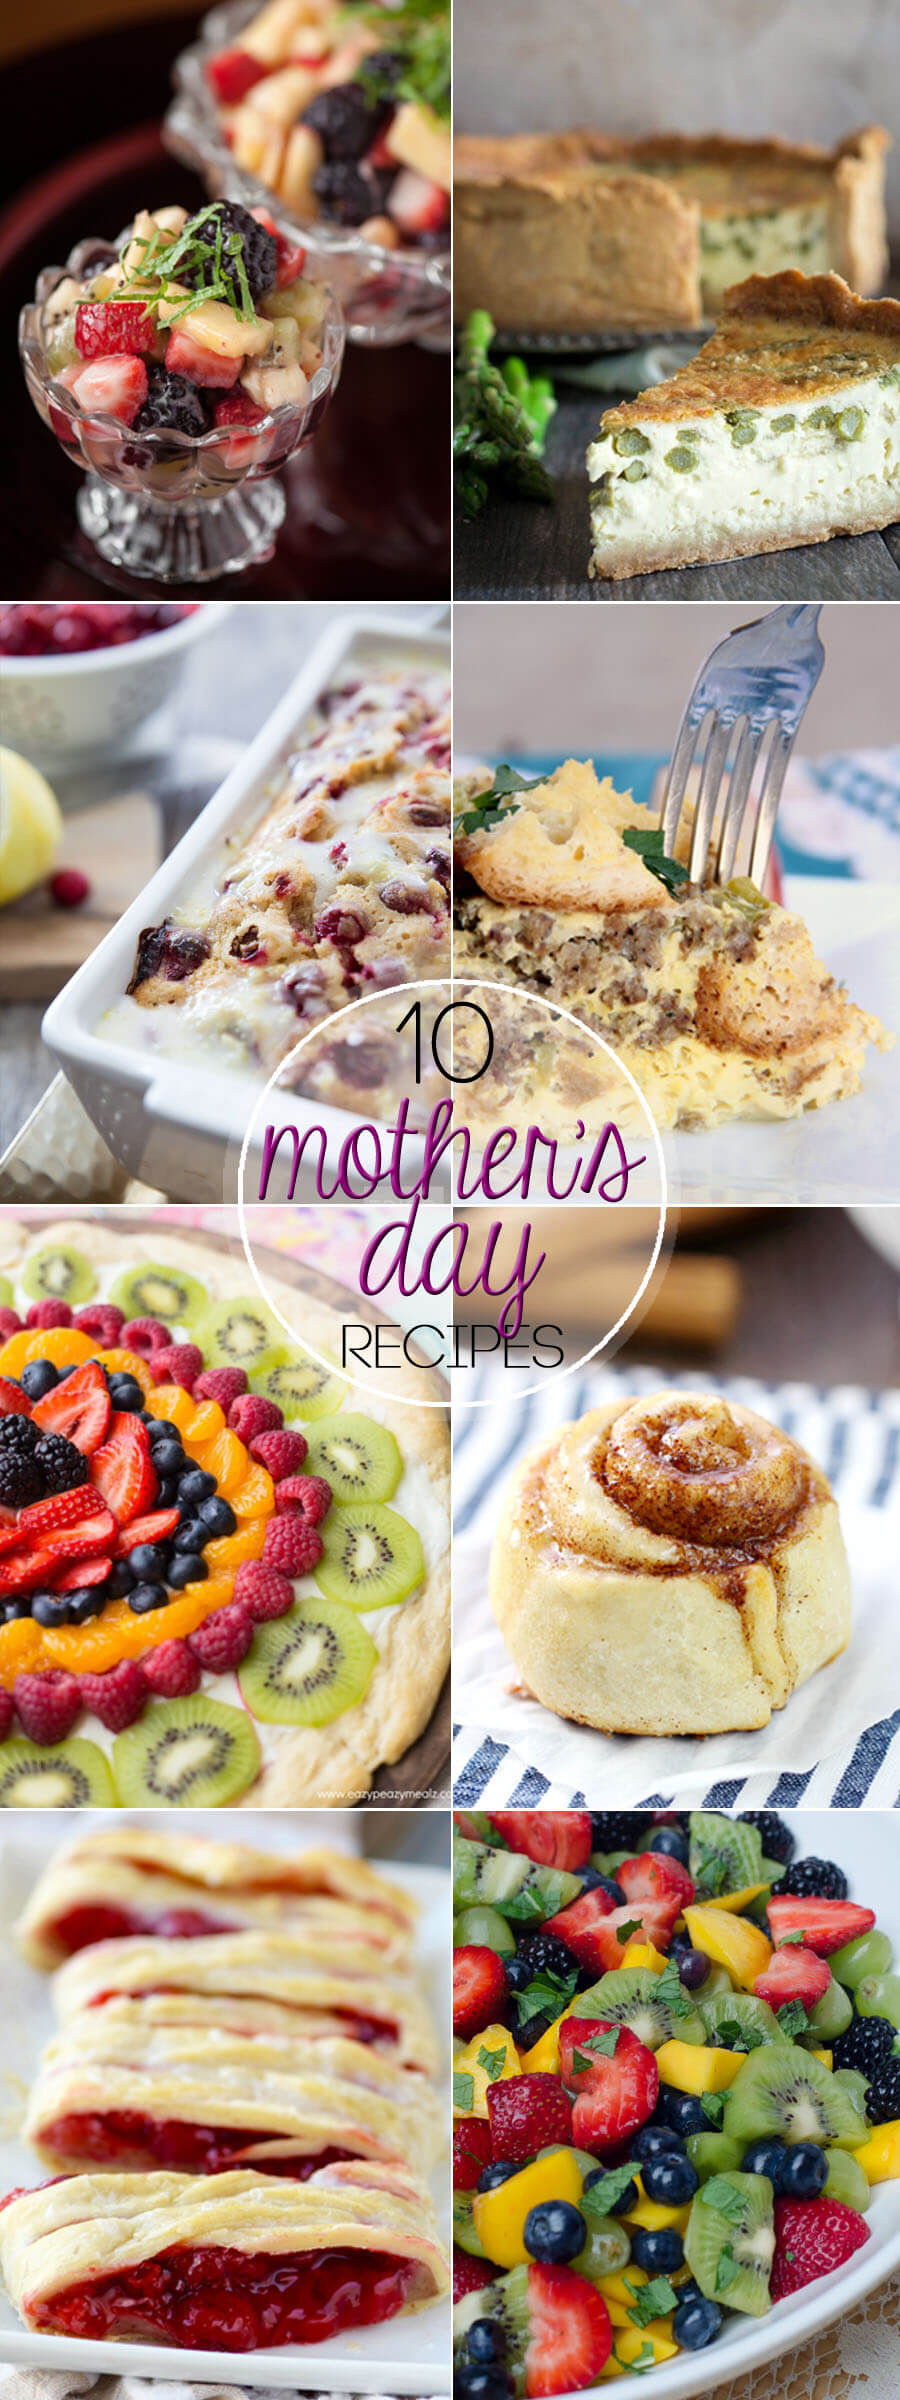 Good Mothers Day Dinners
 10 Great Mother s Day Recipes From Valerie s Kitchen